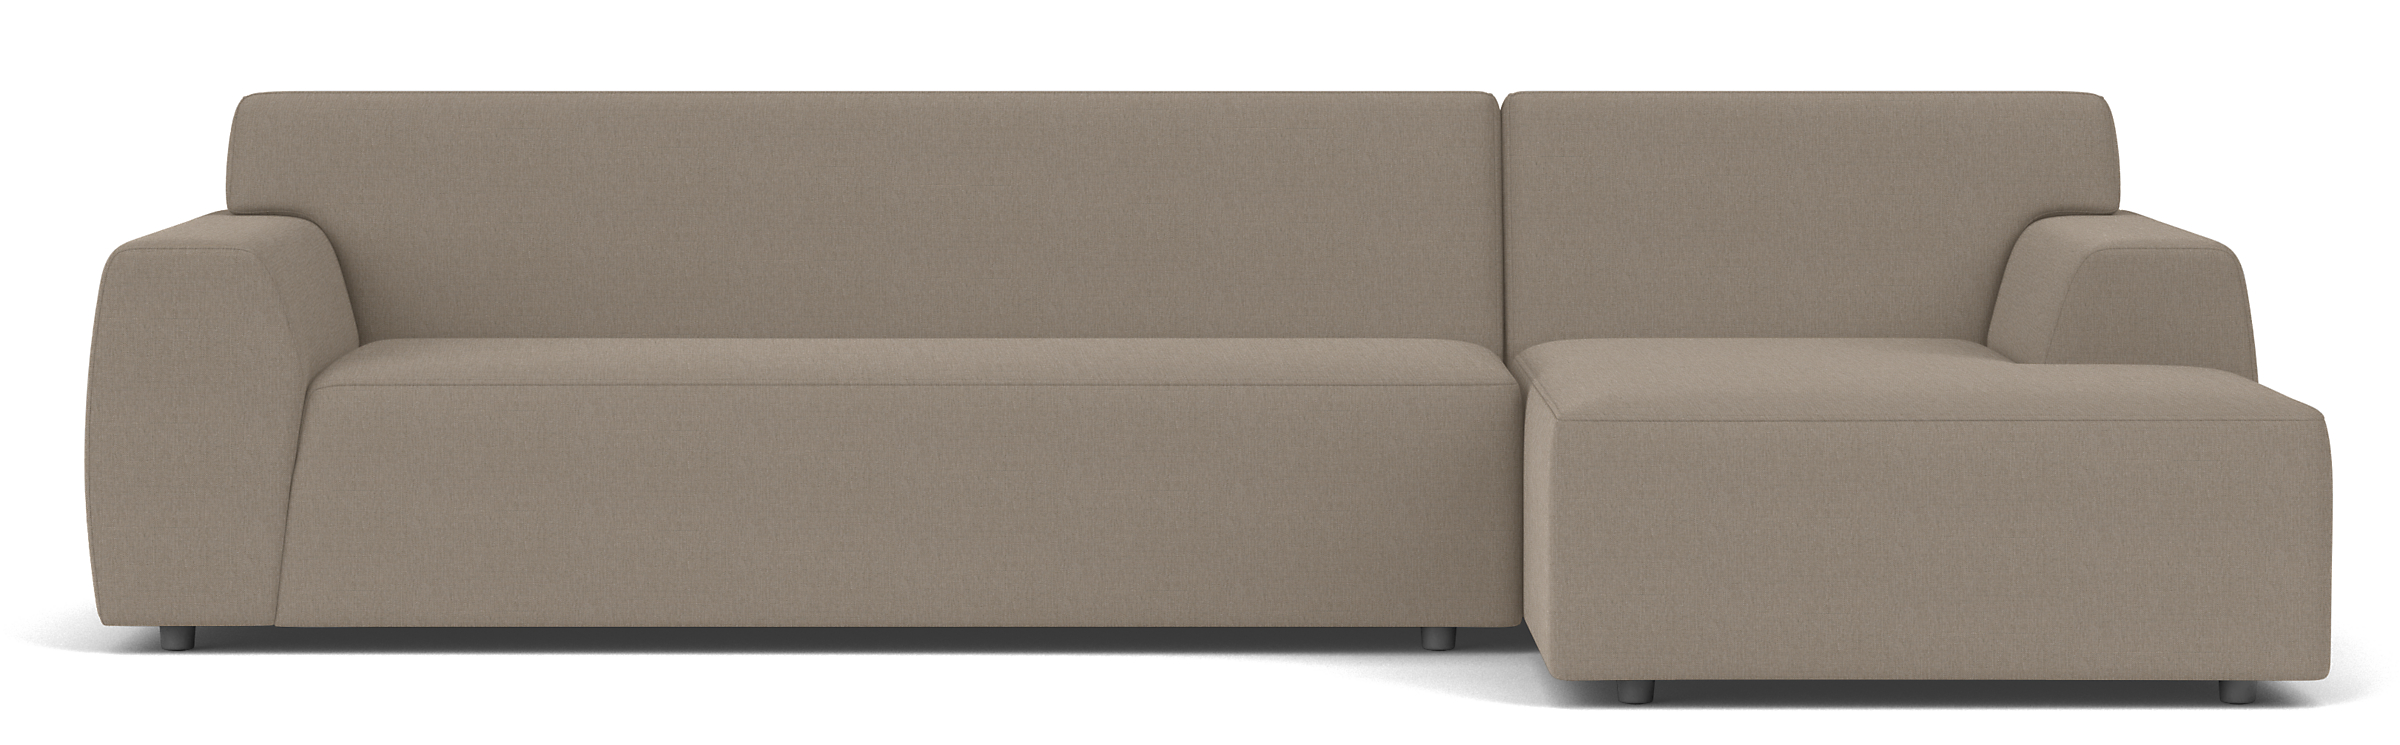 Drift Sofas with Chaise